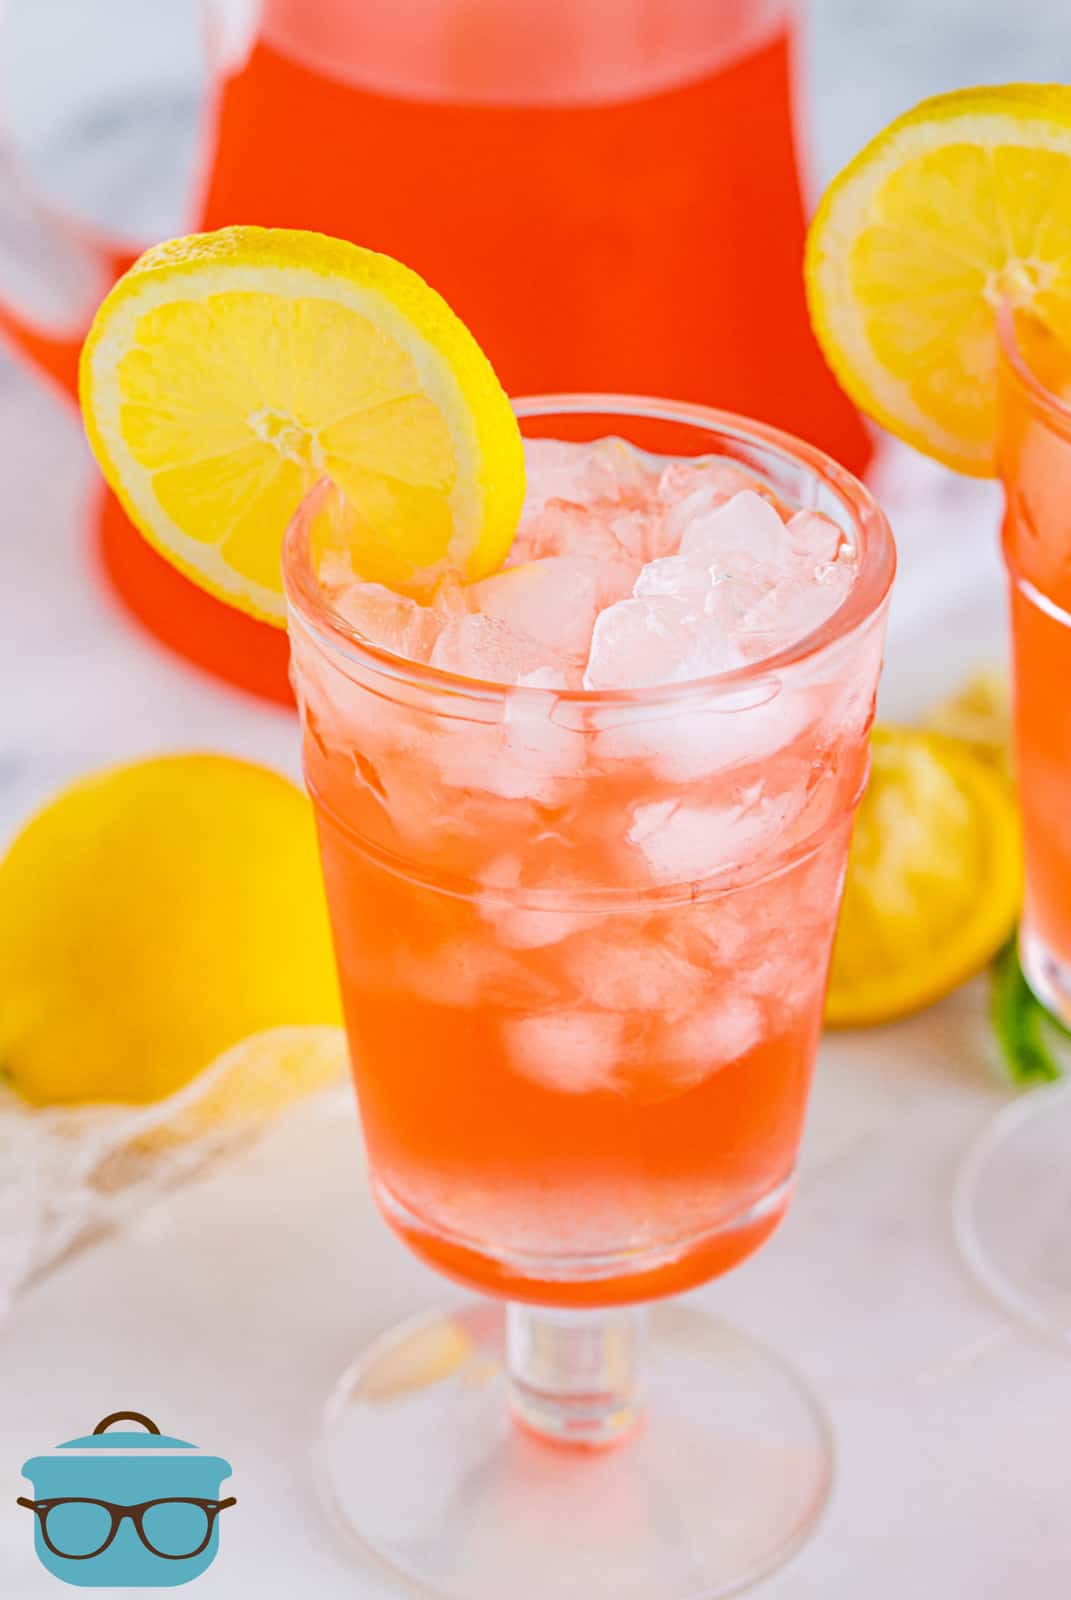 Pink Lemonade Recipe in glass with ice garnished with lemon.